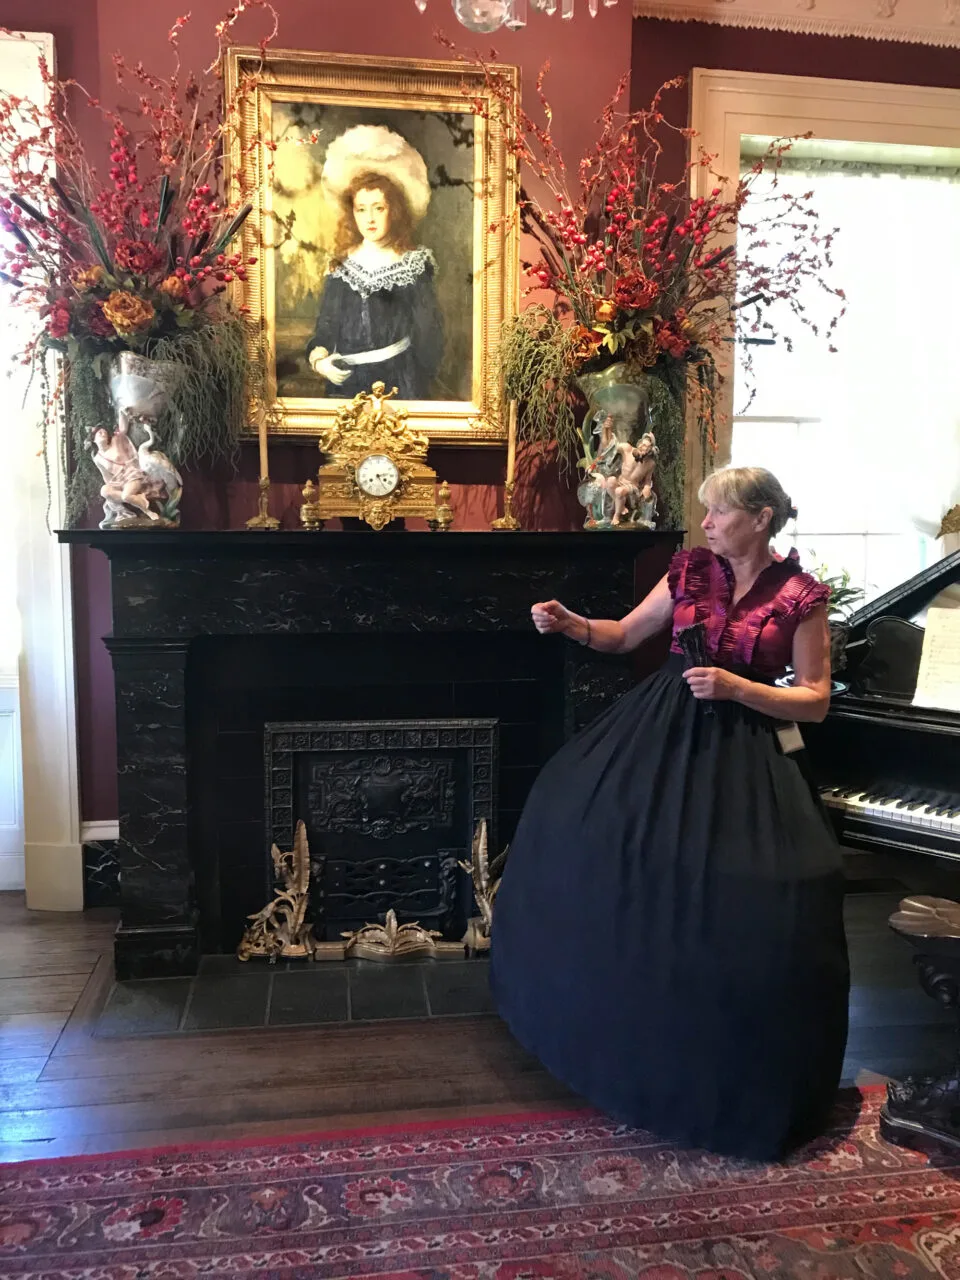 Docent in period dress tells us about the family at Houmas House Plantation.